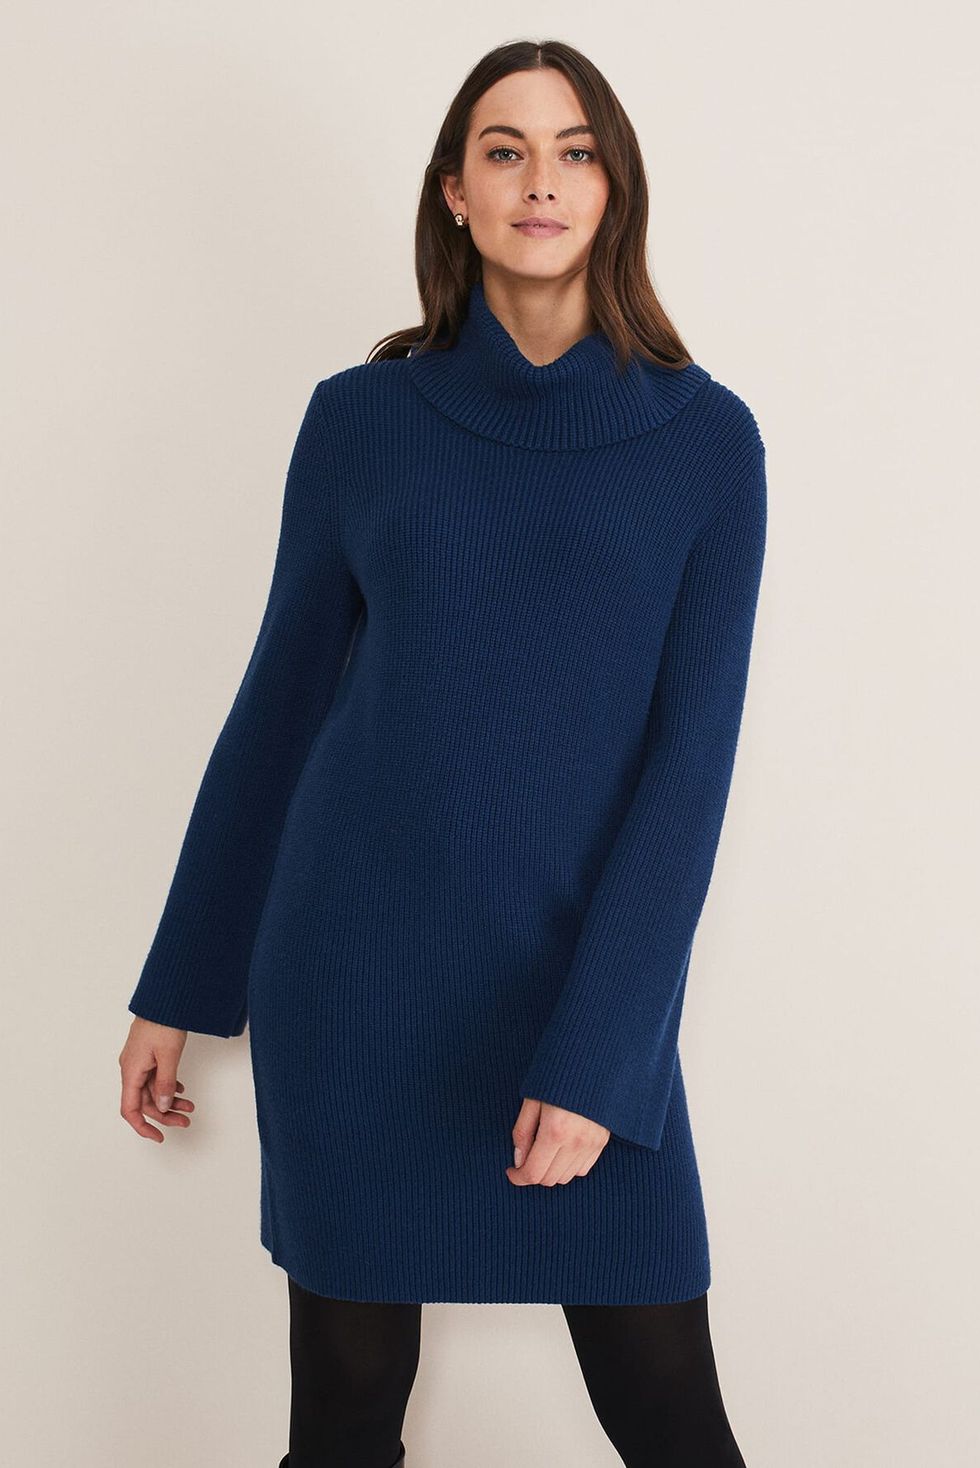 Phase Eight dresses: new knitwear pieces are autumn essentials